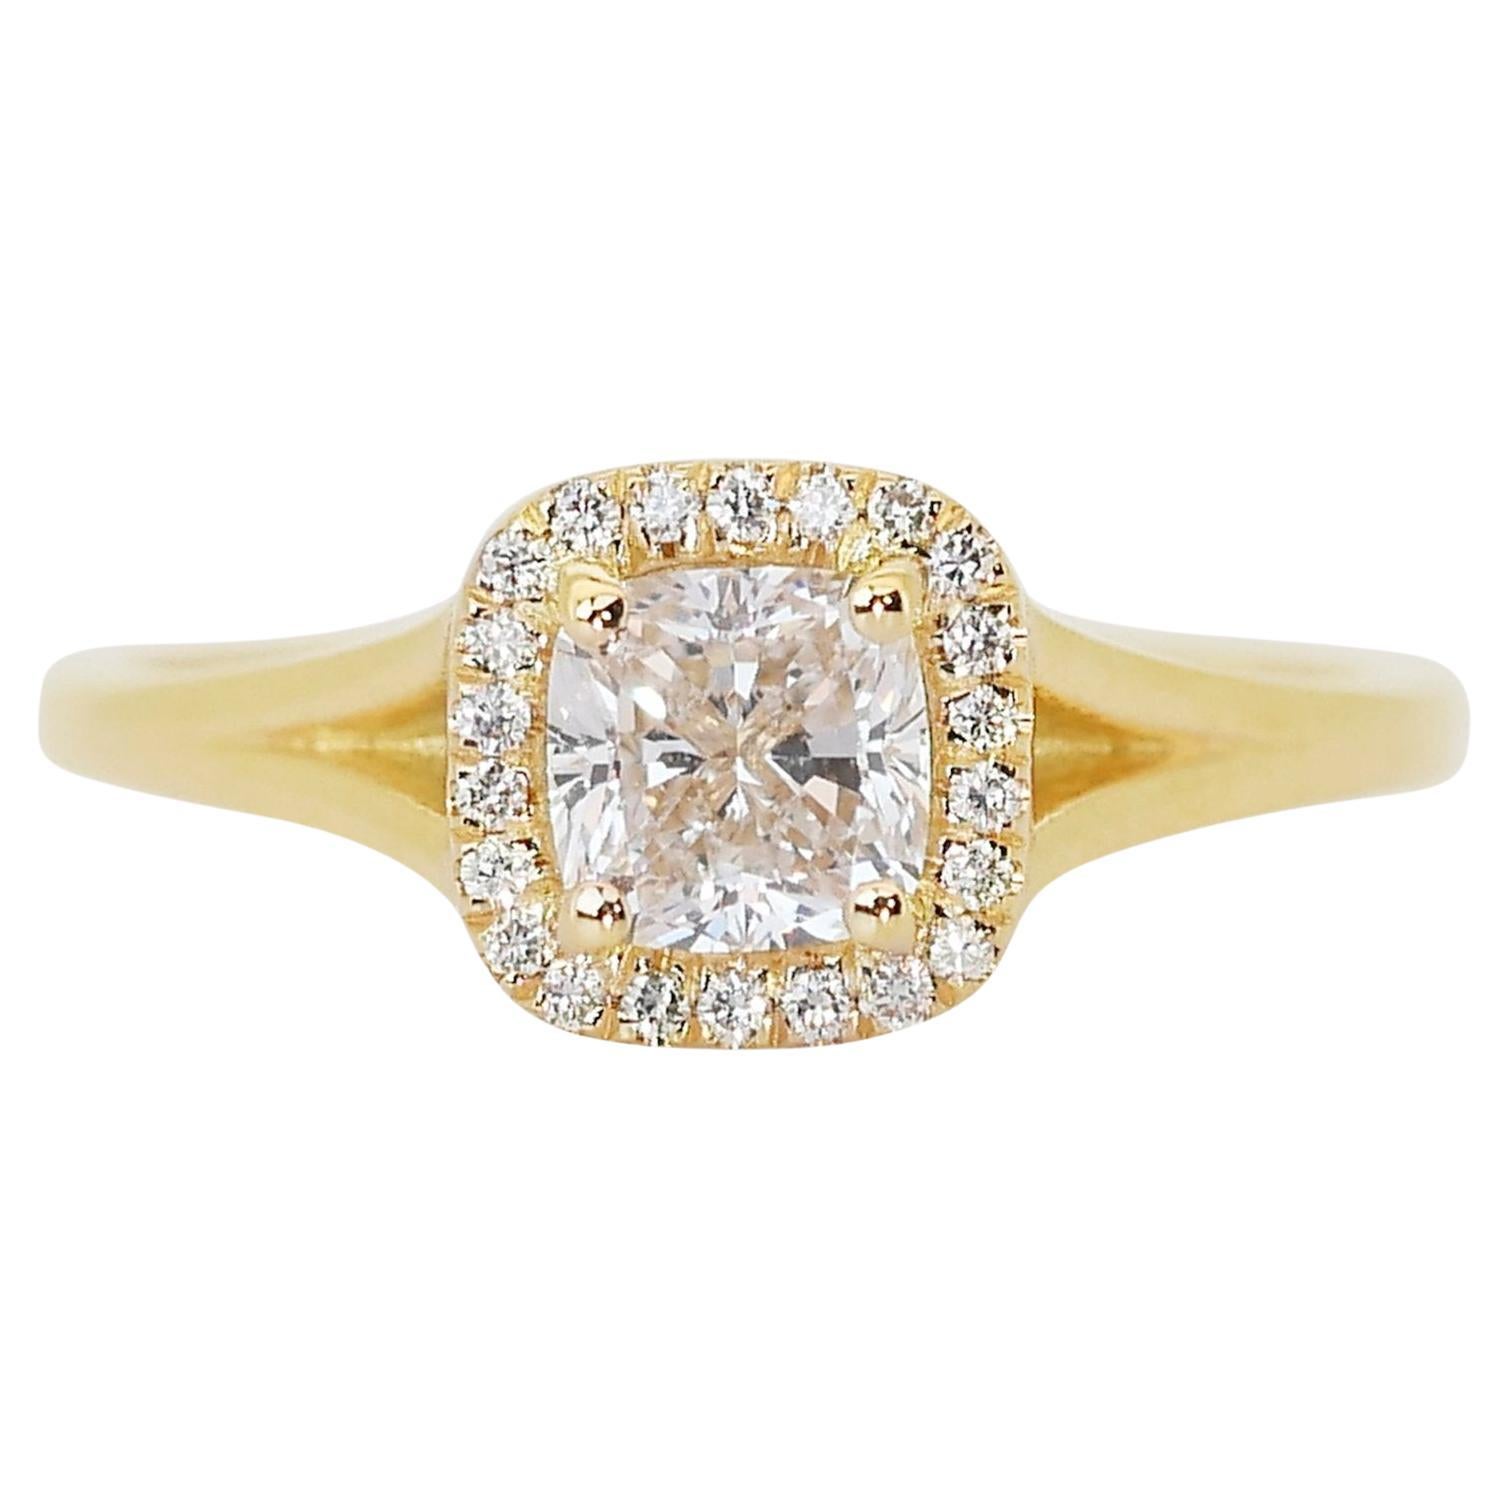 Sparkling 1.63ct Diamond Halo Ring in 18k Yellow Gold - GIA Certified